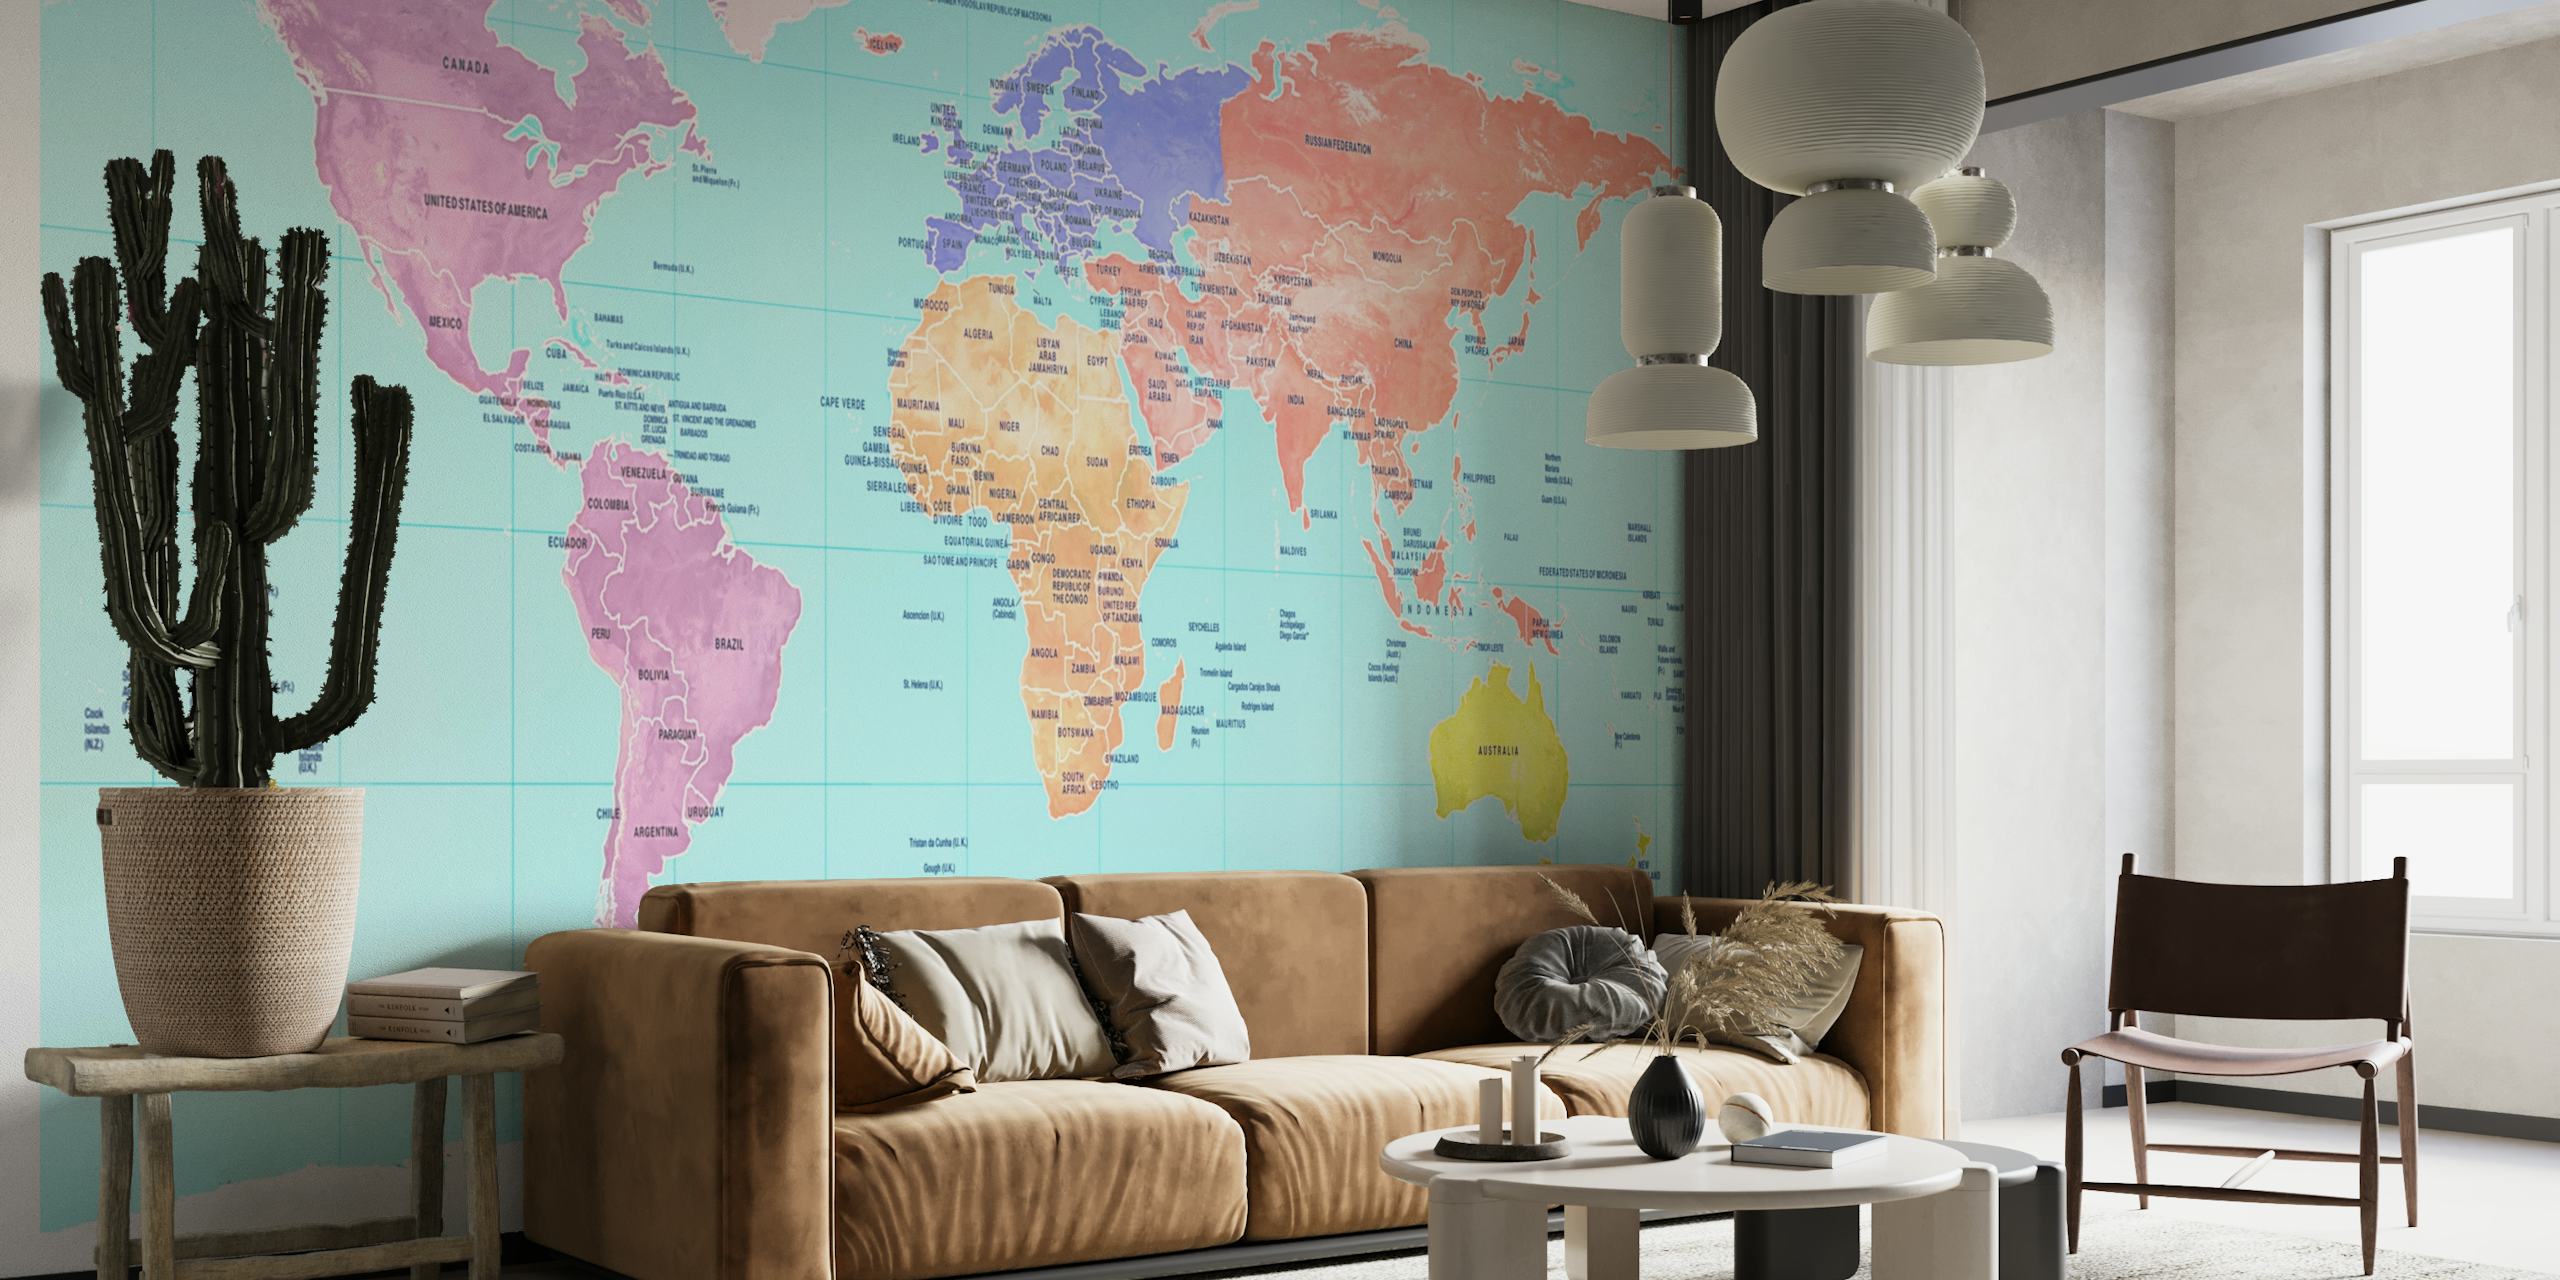 Colorful world map wall mural showing continents in different hues